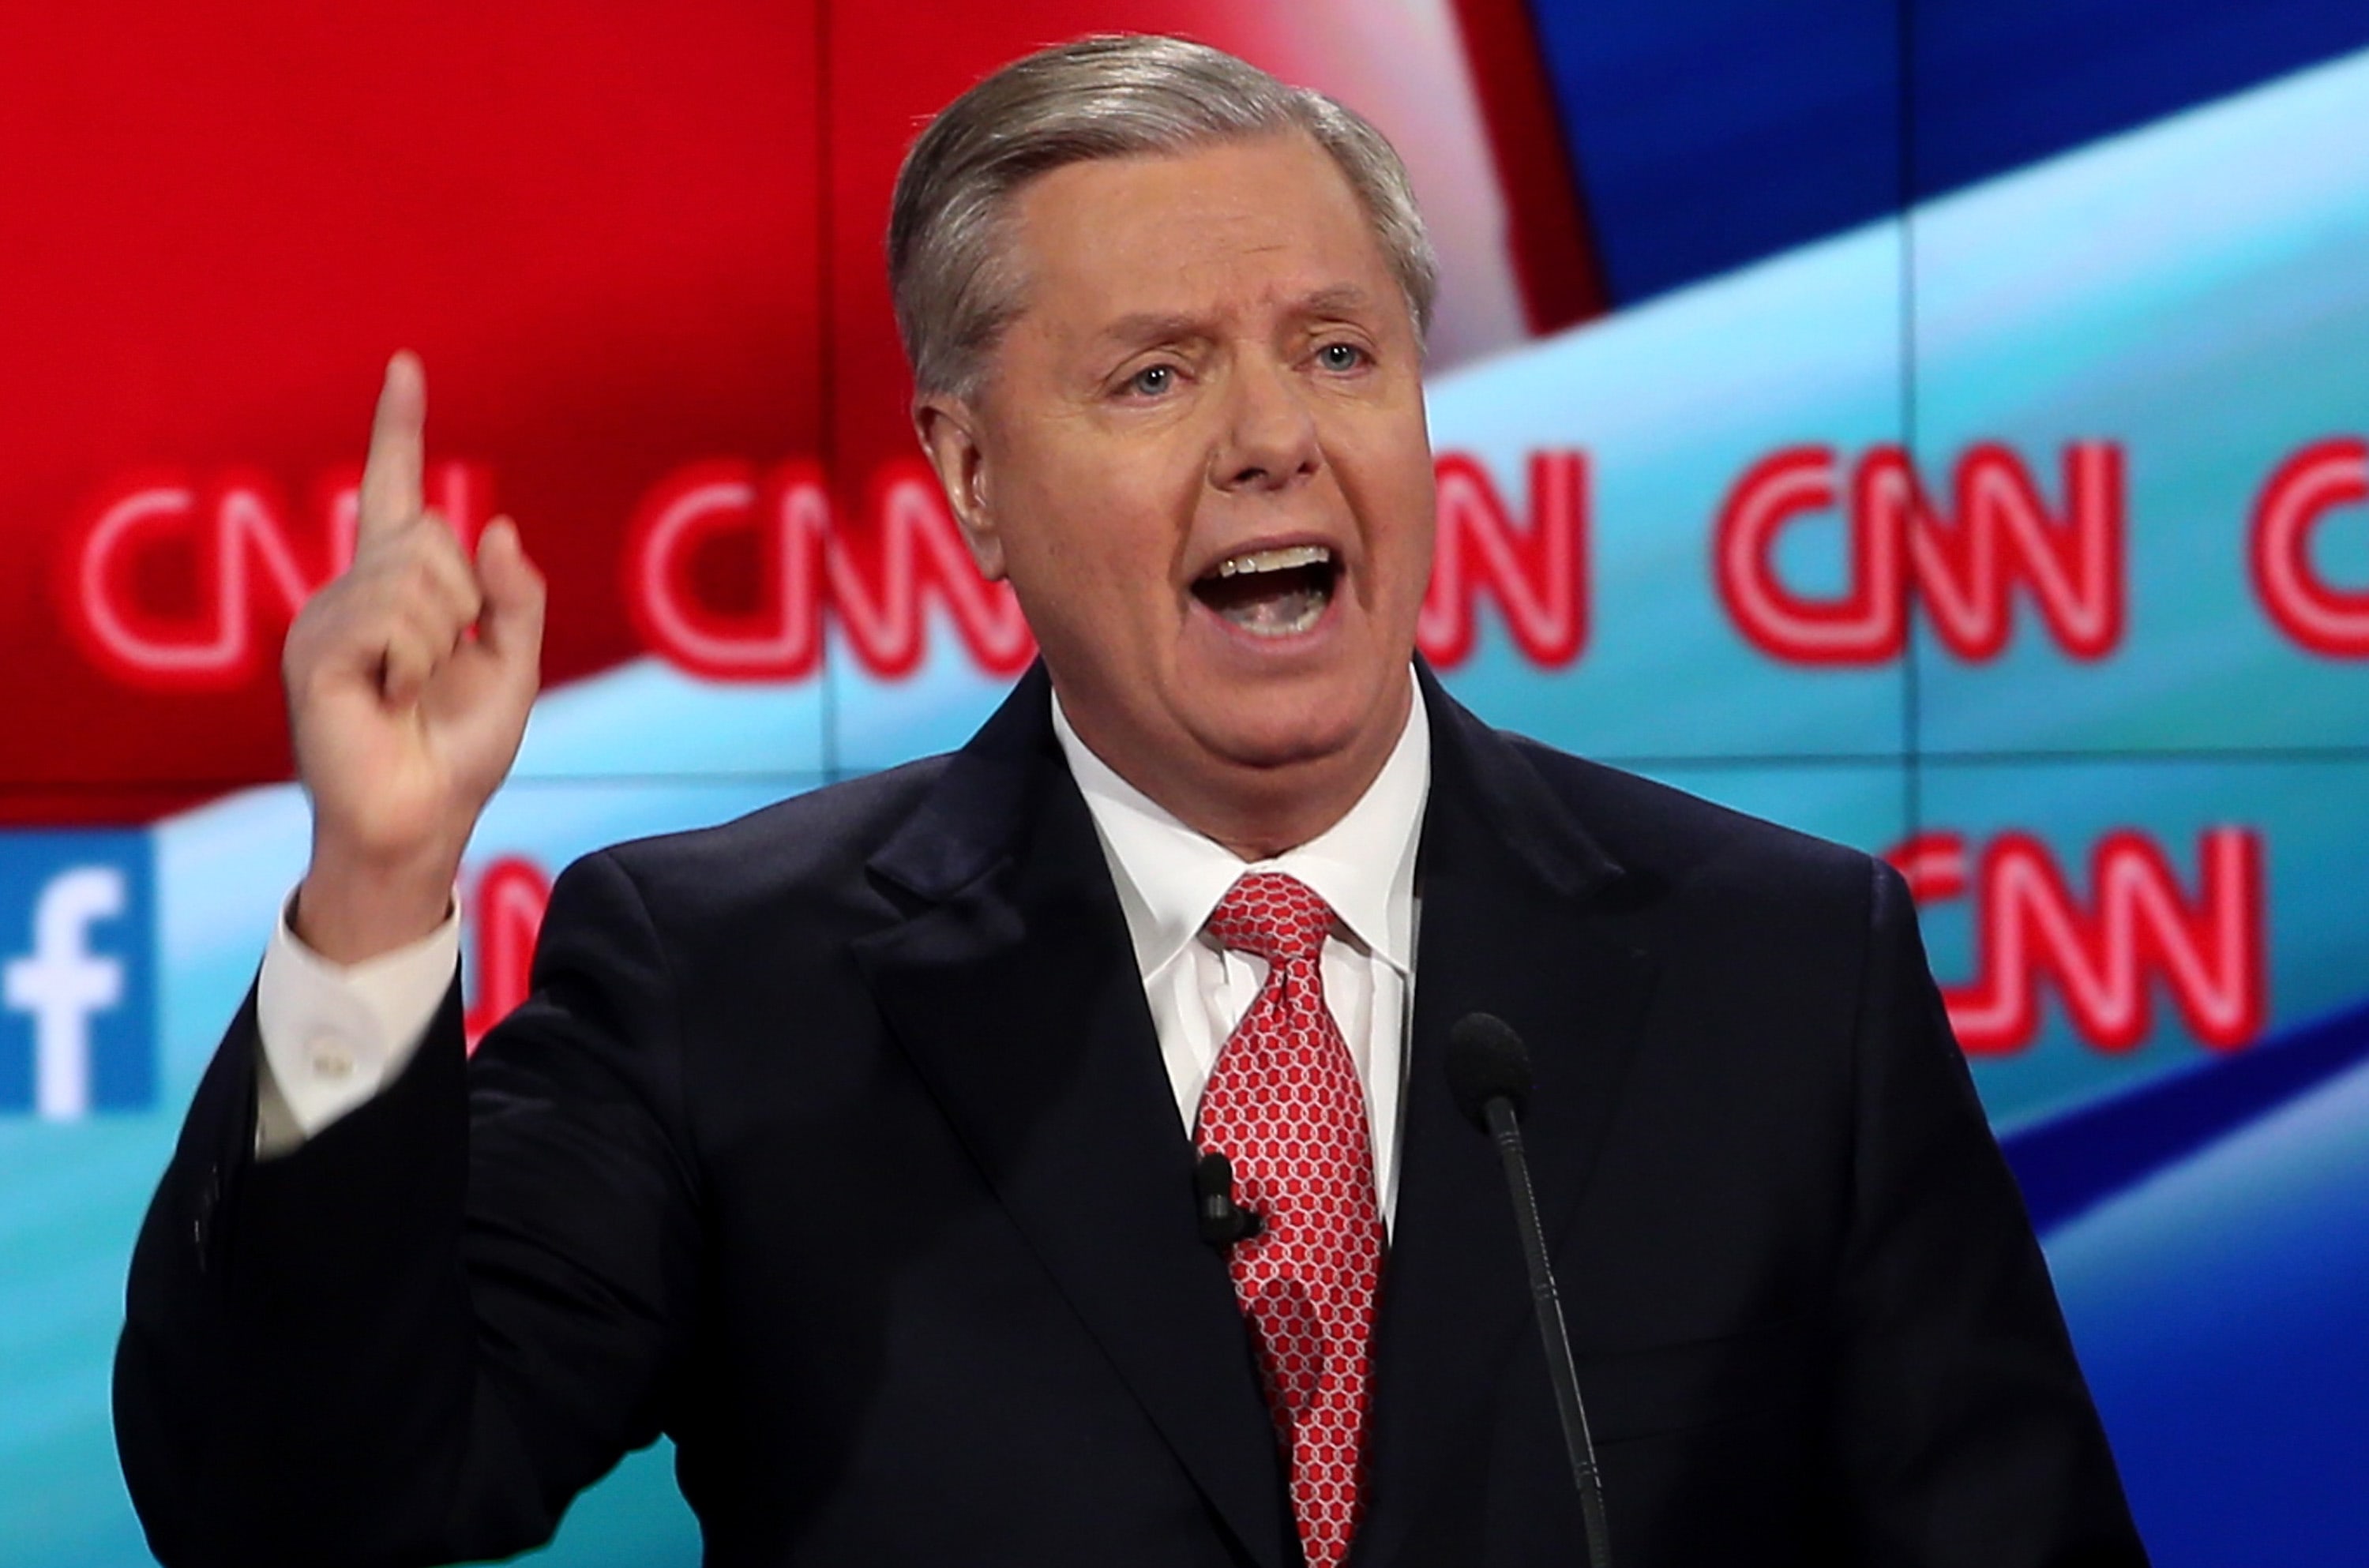 Lindsey Graham has dropped out of the race for the Republican nomination.